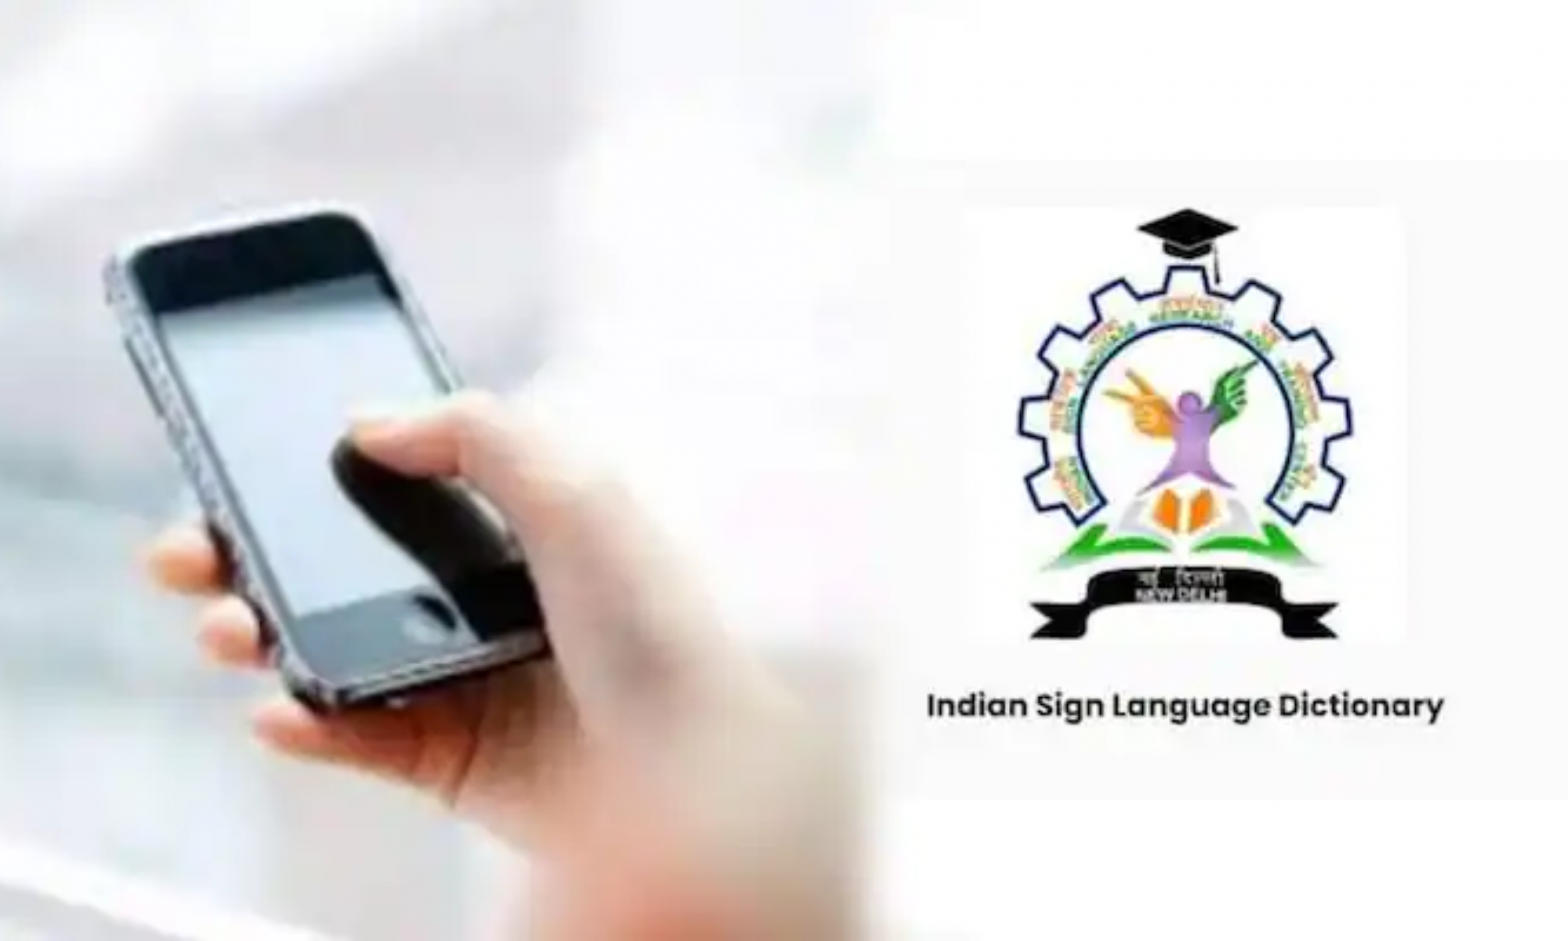 "Sign Learn" smartphone app